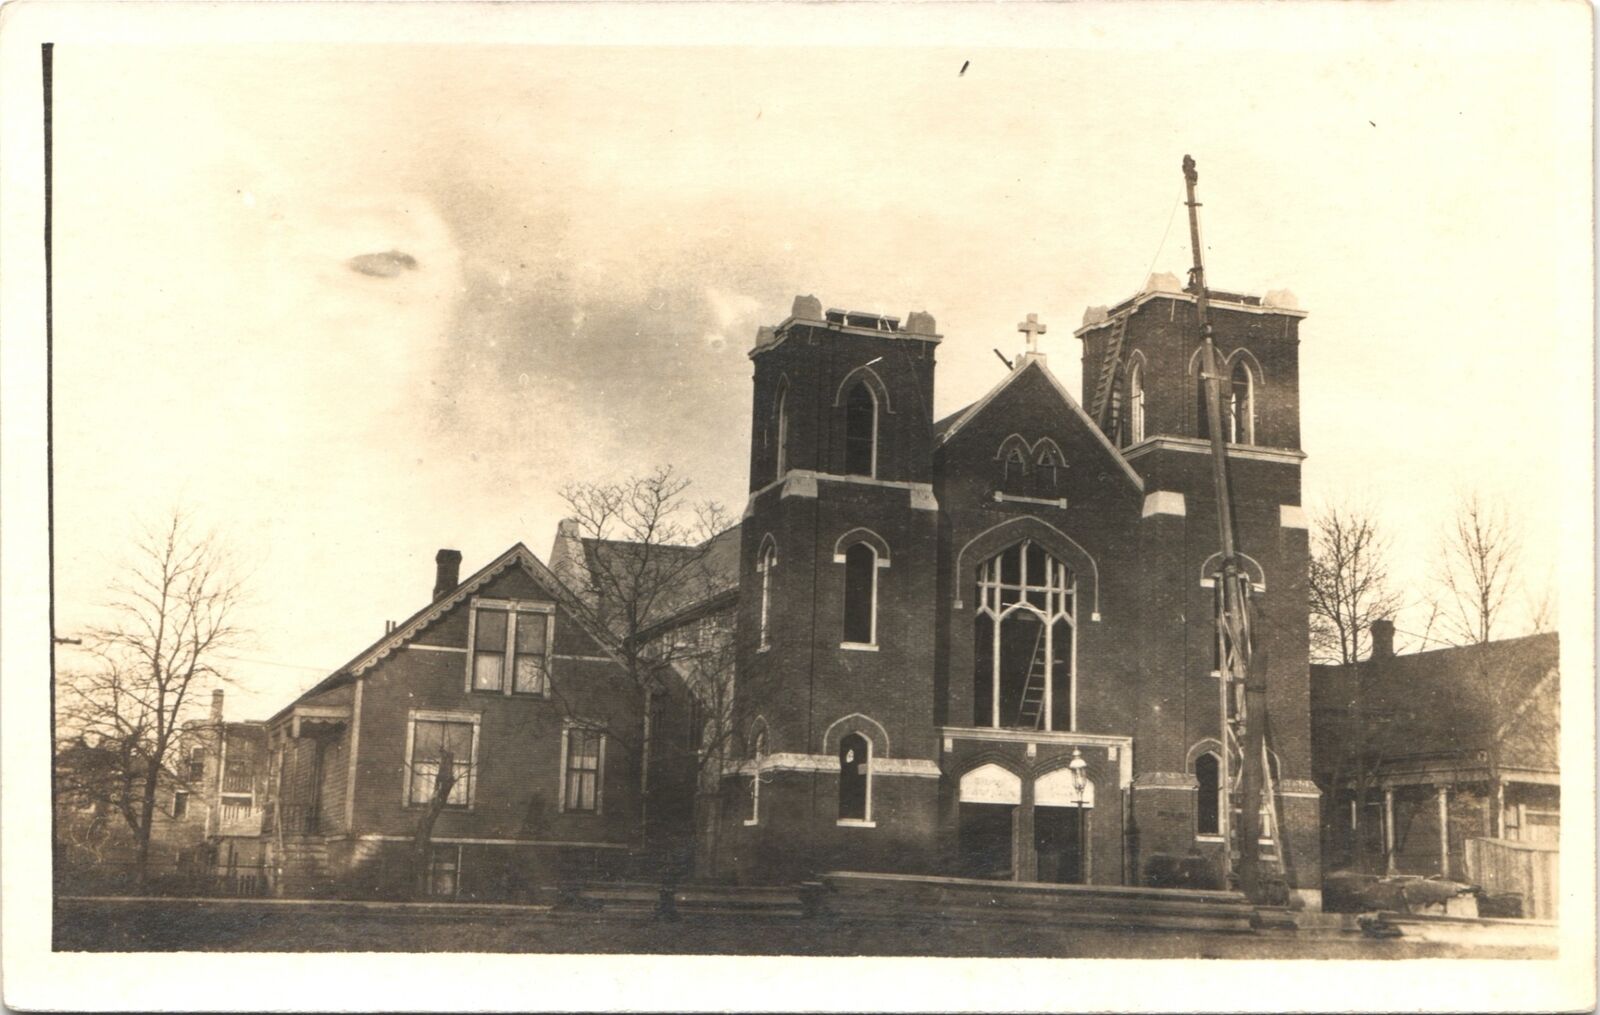 BRICK CHURCH CONSTRUCTION WITH CRANE real photo postcard OCCUPATIONAL 1910s rppc